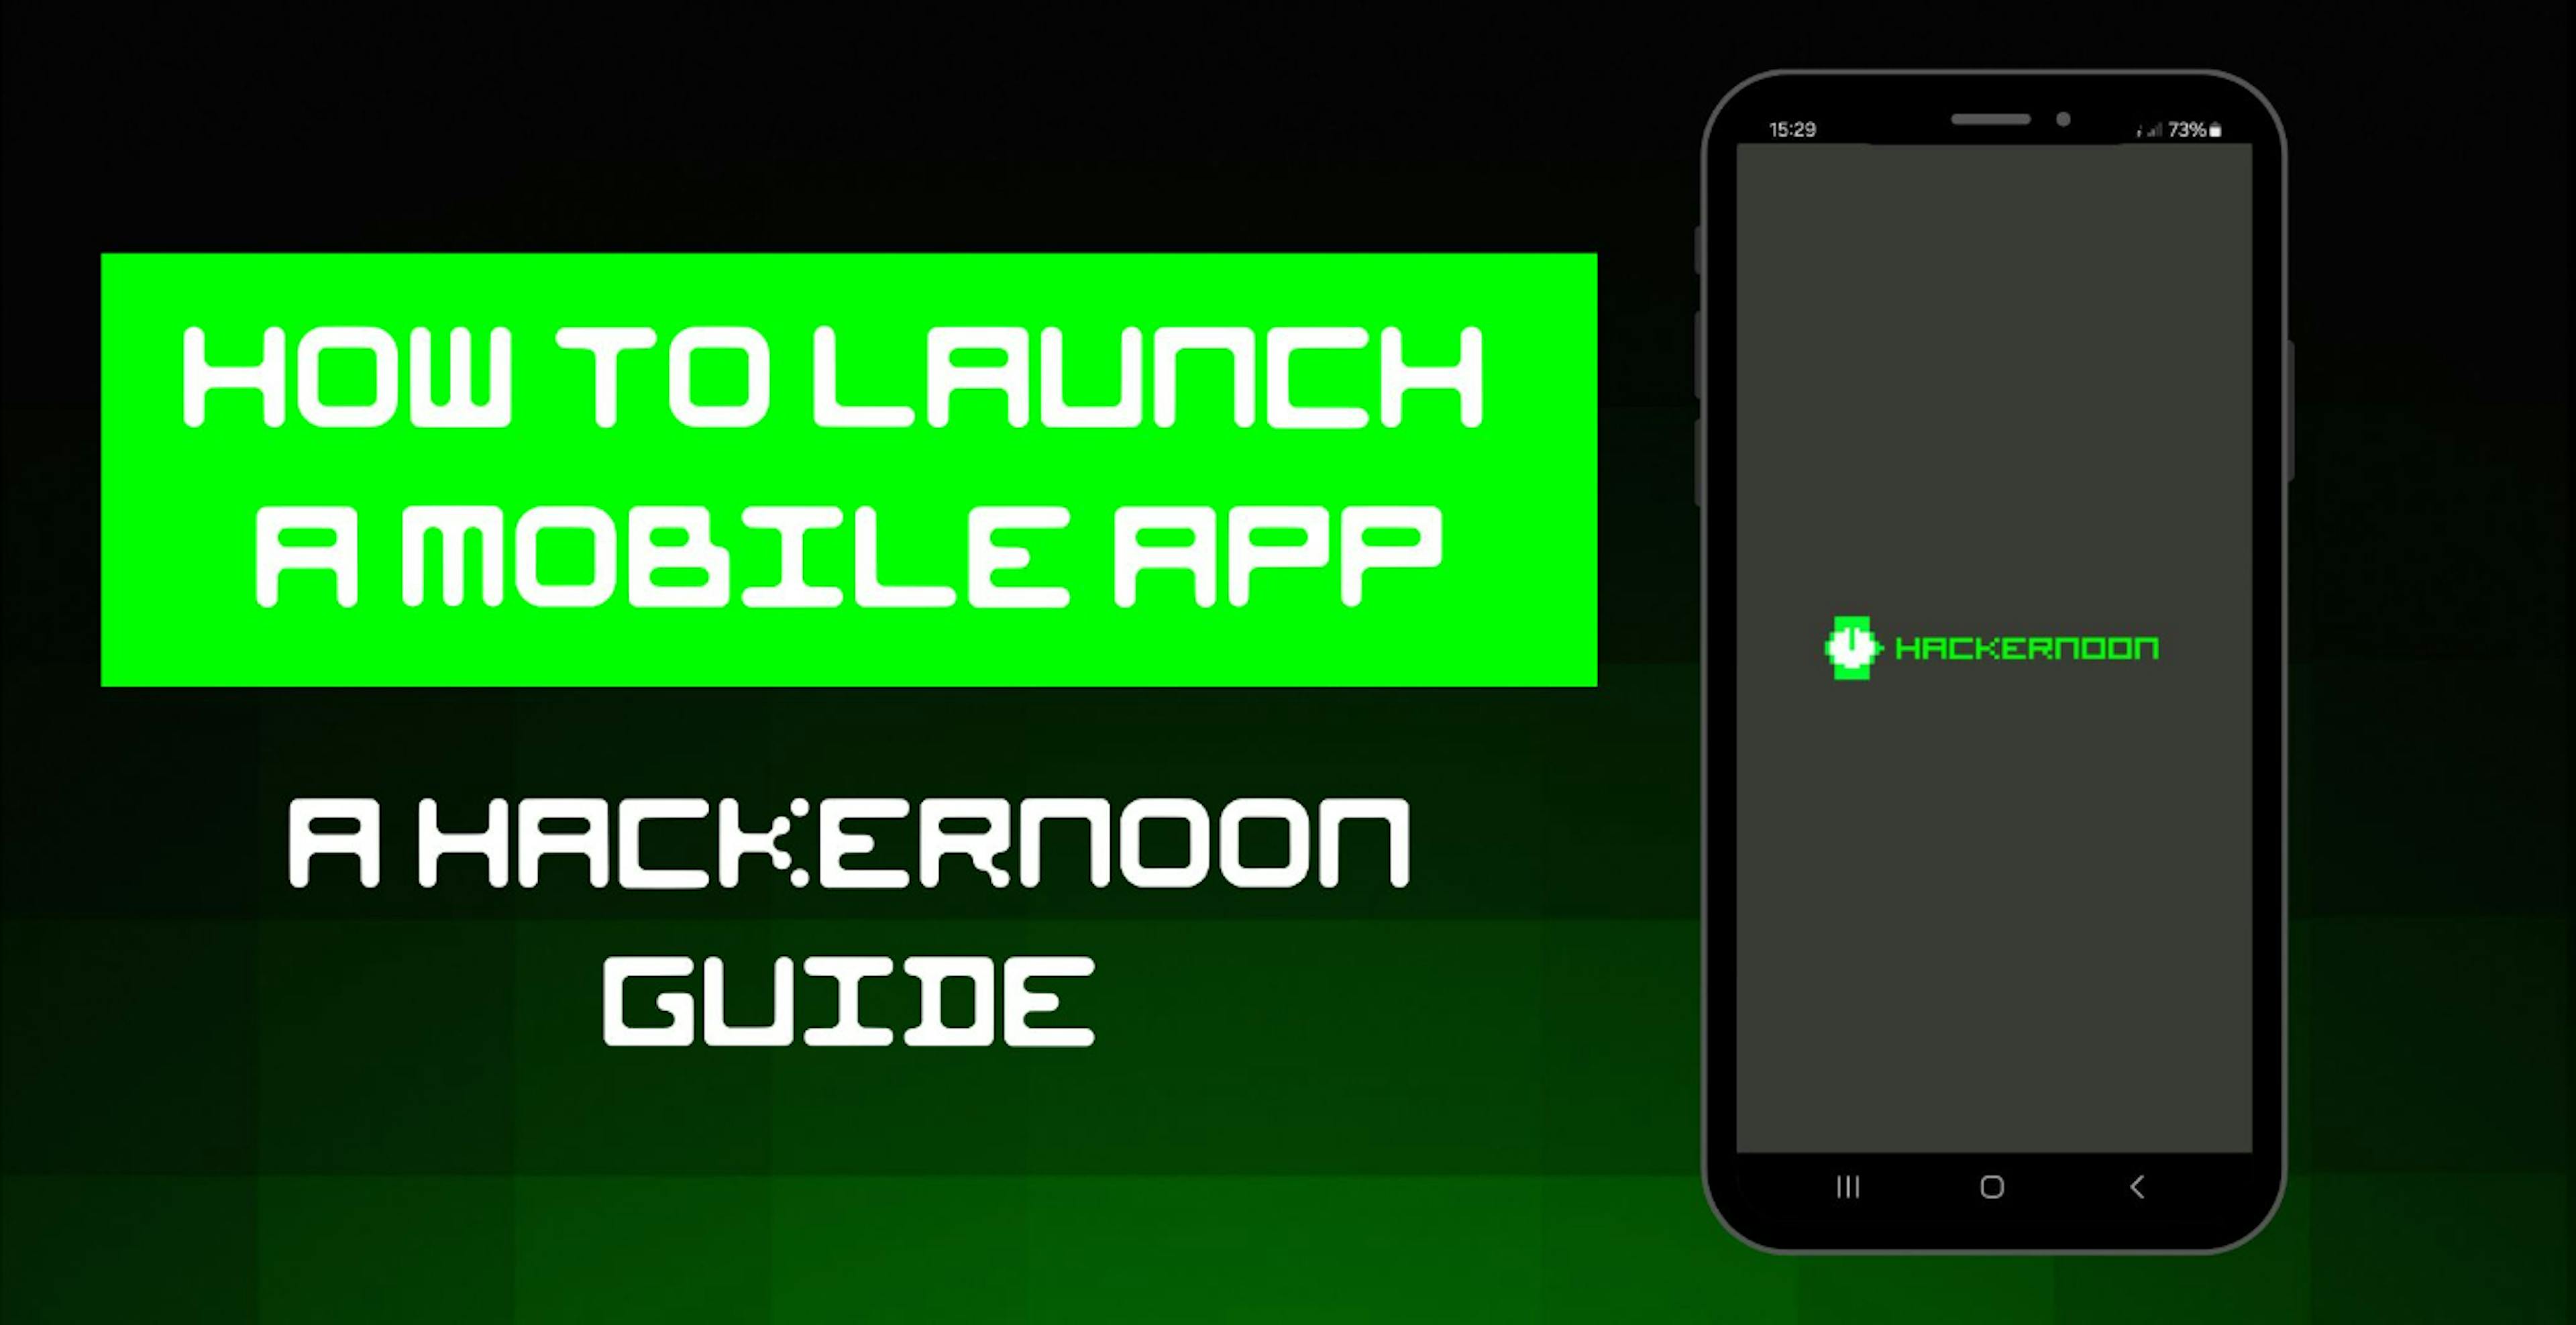 featured image - How to Launch an App: Google Play Store Step-by-step Guide